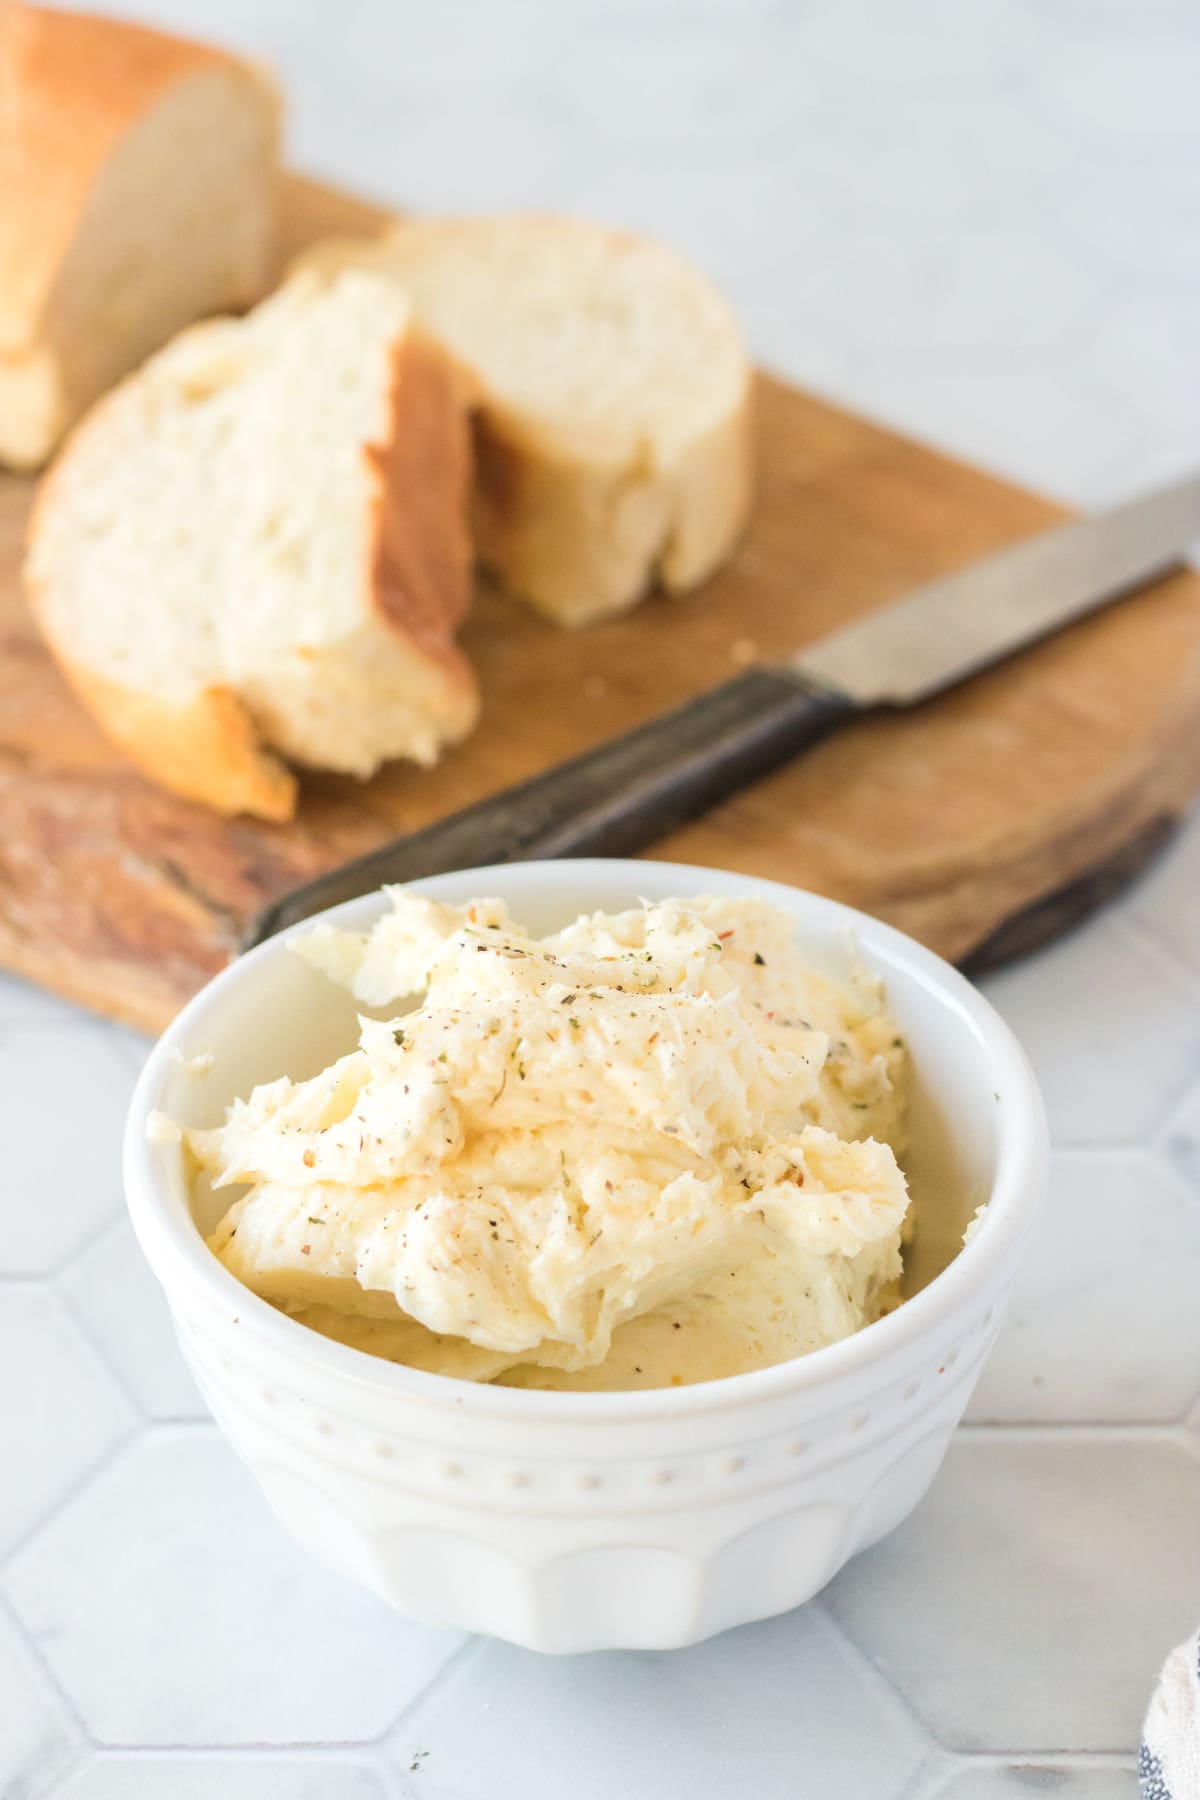 Garlic butter in a white bowl with bread behind it.